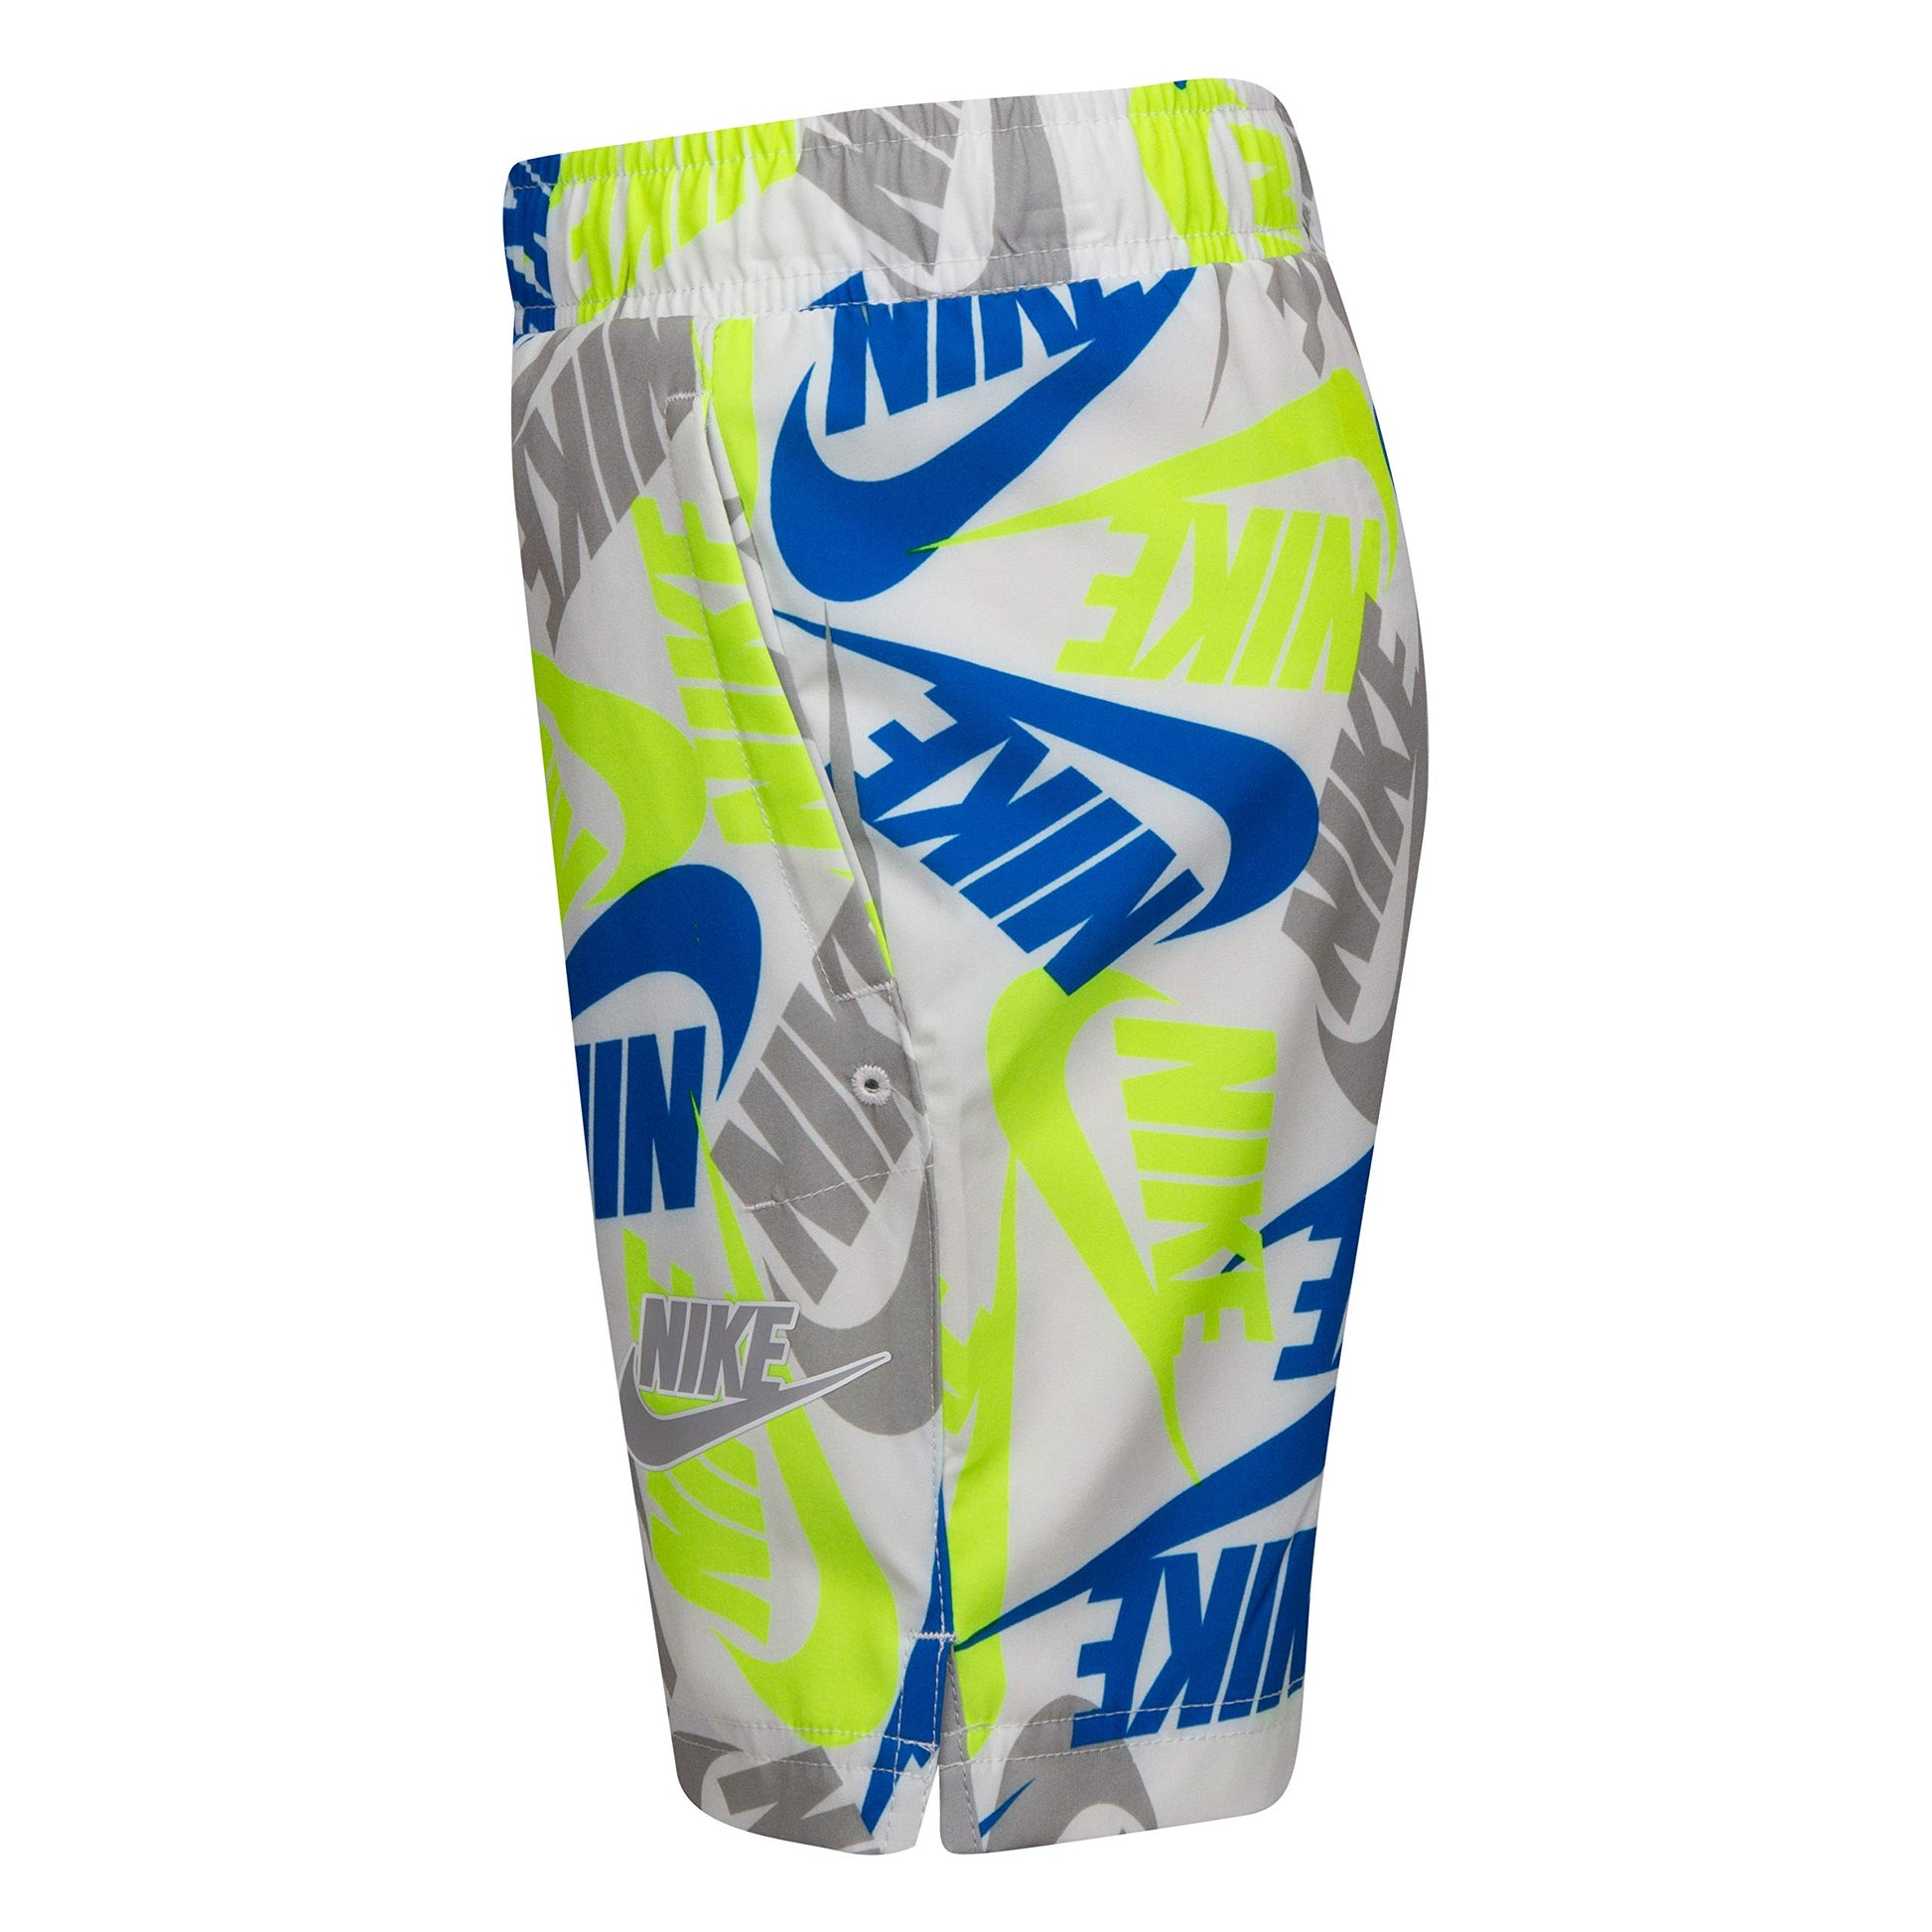 Image 2 of NSW Woven Print Shorts (Little Kids)